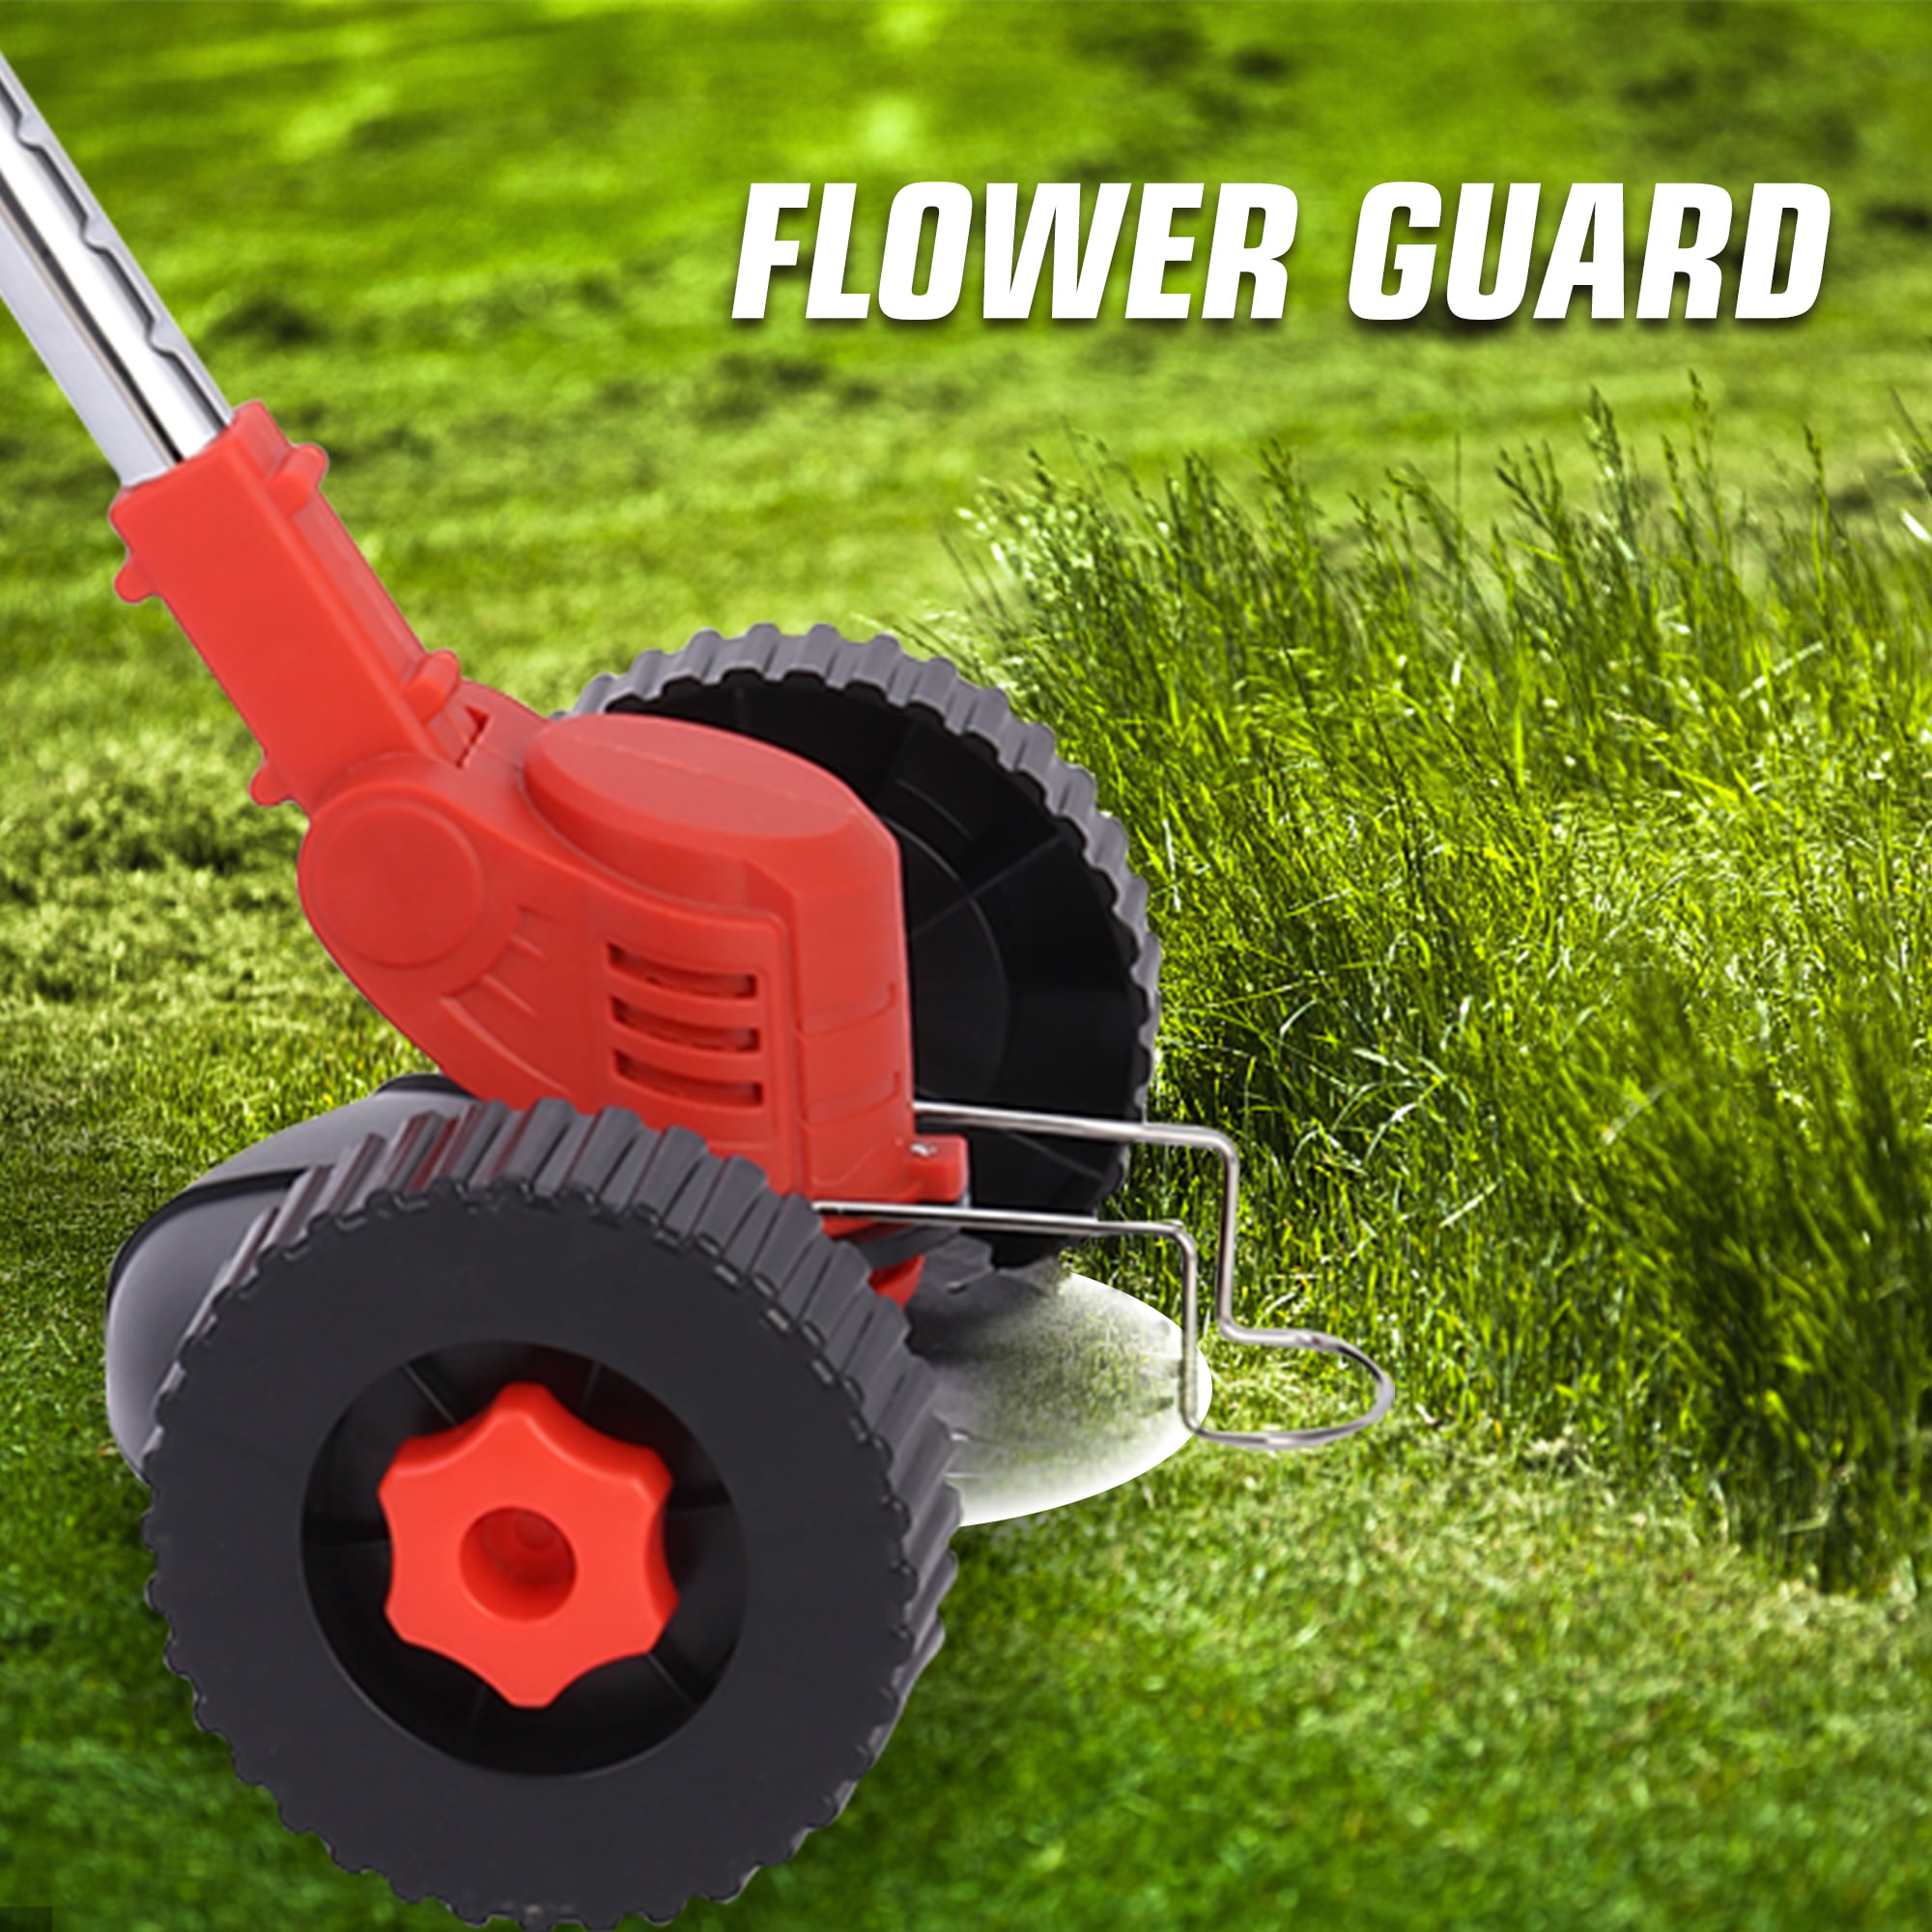  Cordless Trimmer Weed MowerTrimmer,Lightweight 3-IN-1 with  Edger Tool,Mower for Garden and Yard,3 Kinds of Blades,Liiion Battery ,21V  2Ah ,Red : Patio, Lawn & Garden